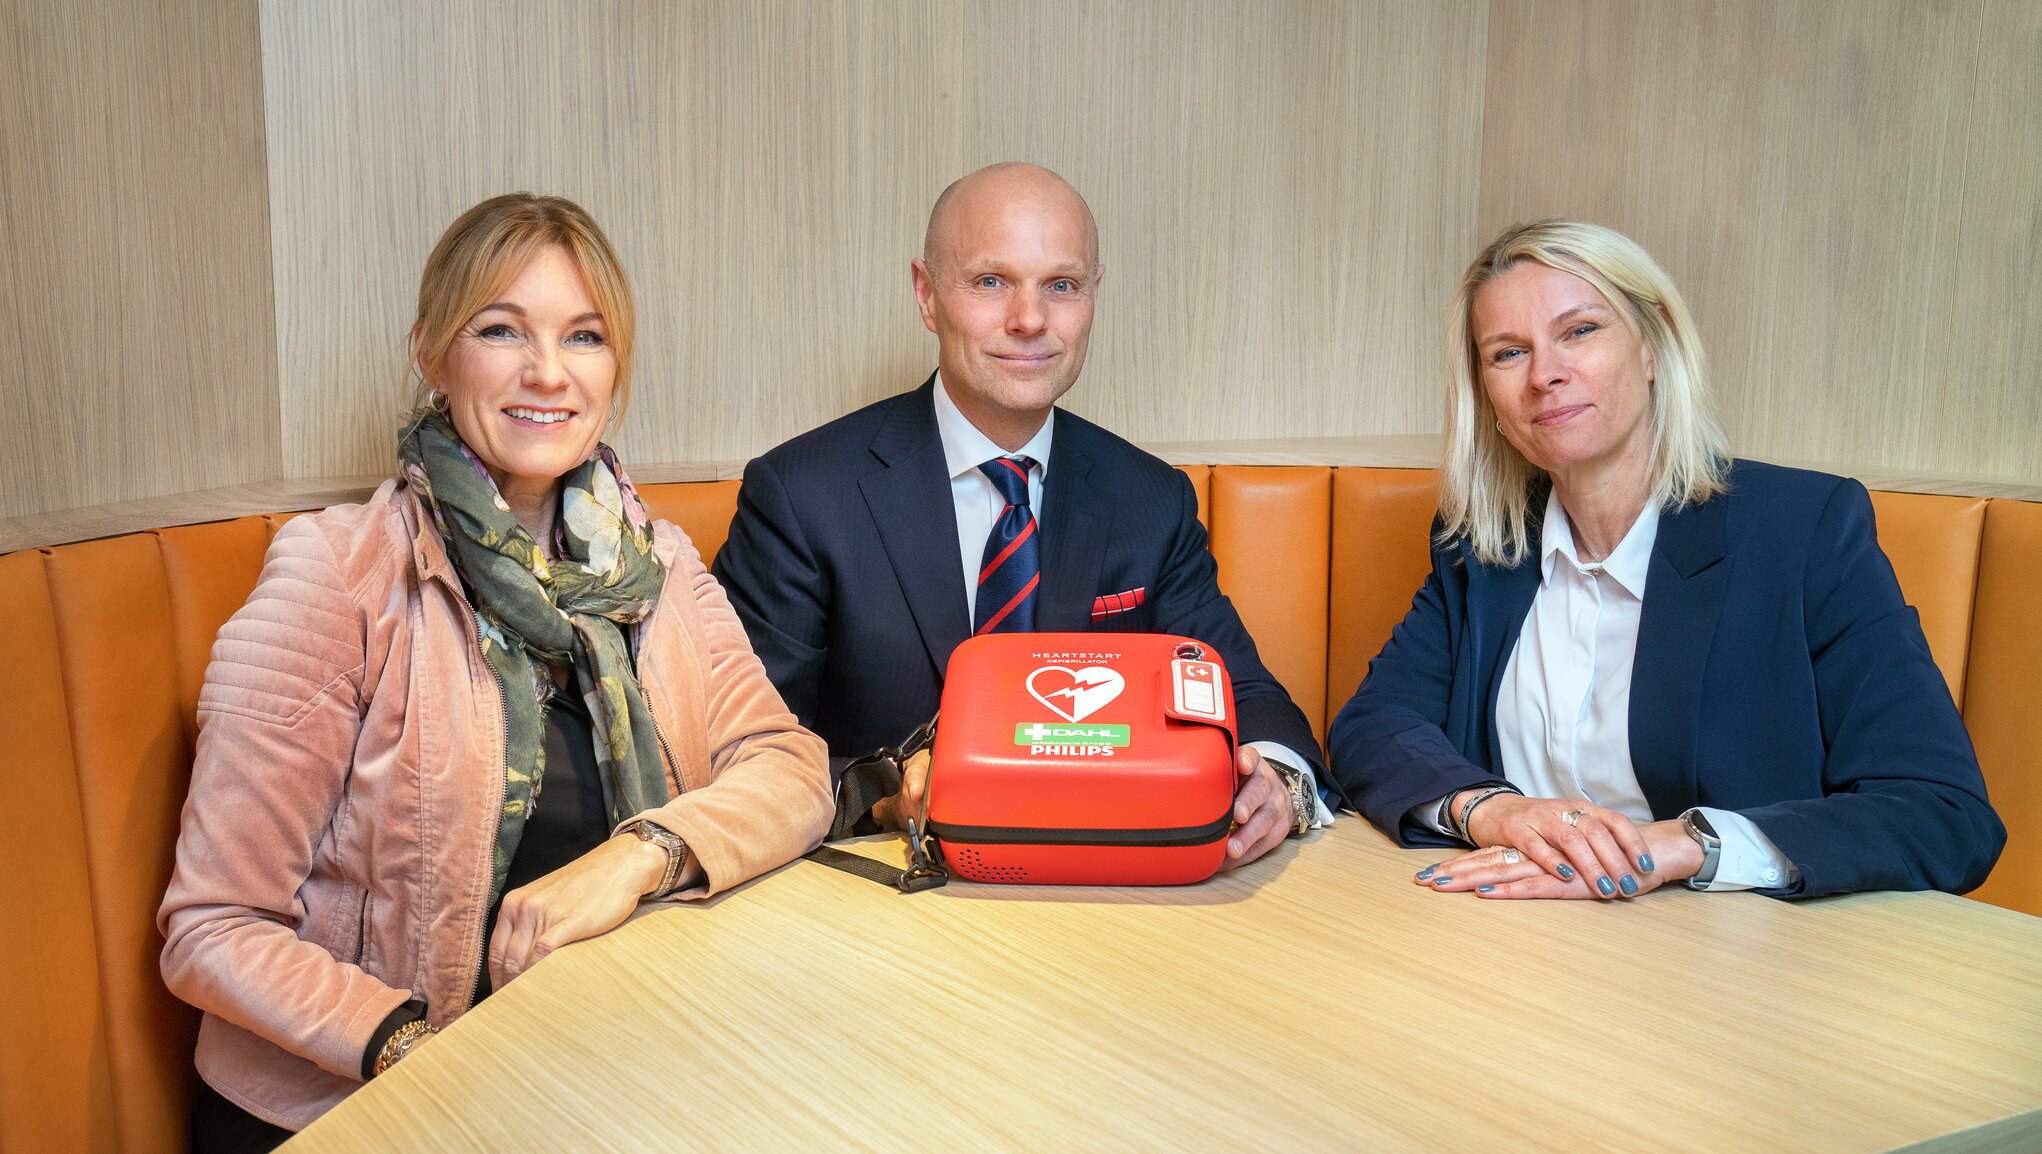 Morten Thorsrud with representatives from the Hearth and Lung assosiation.